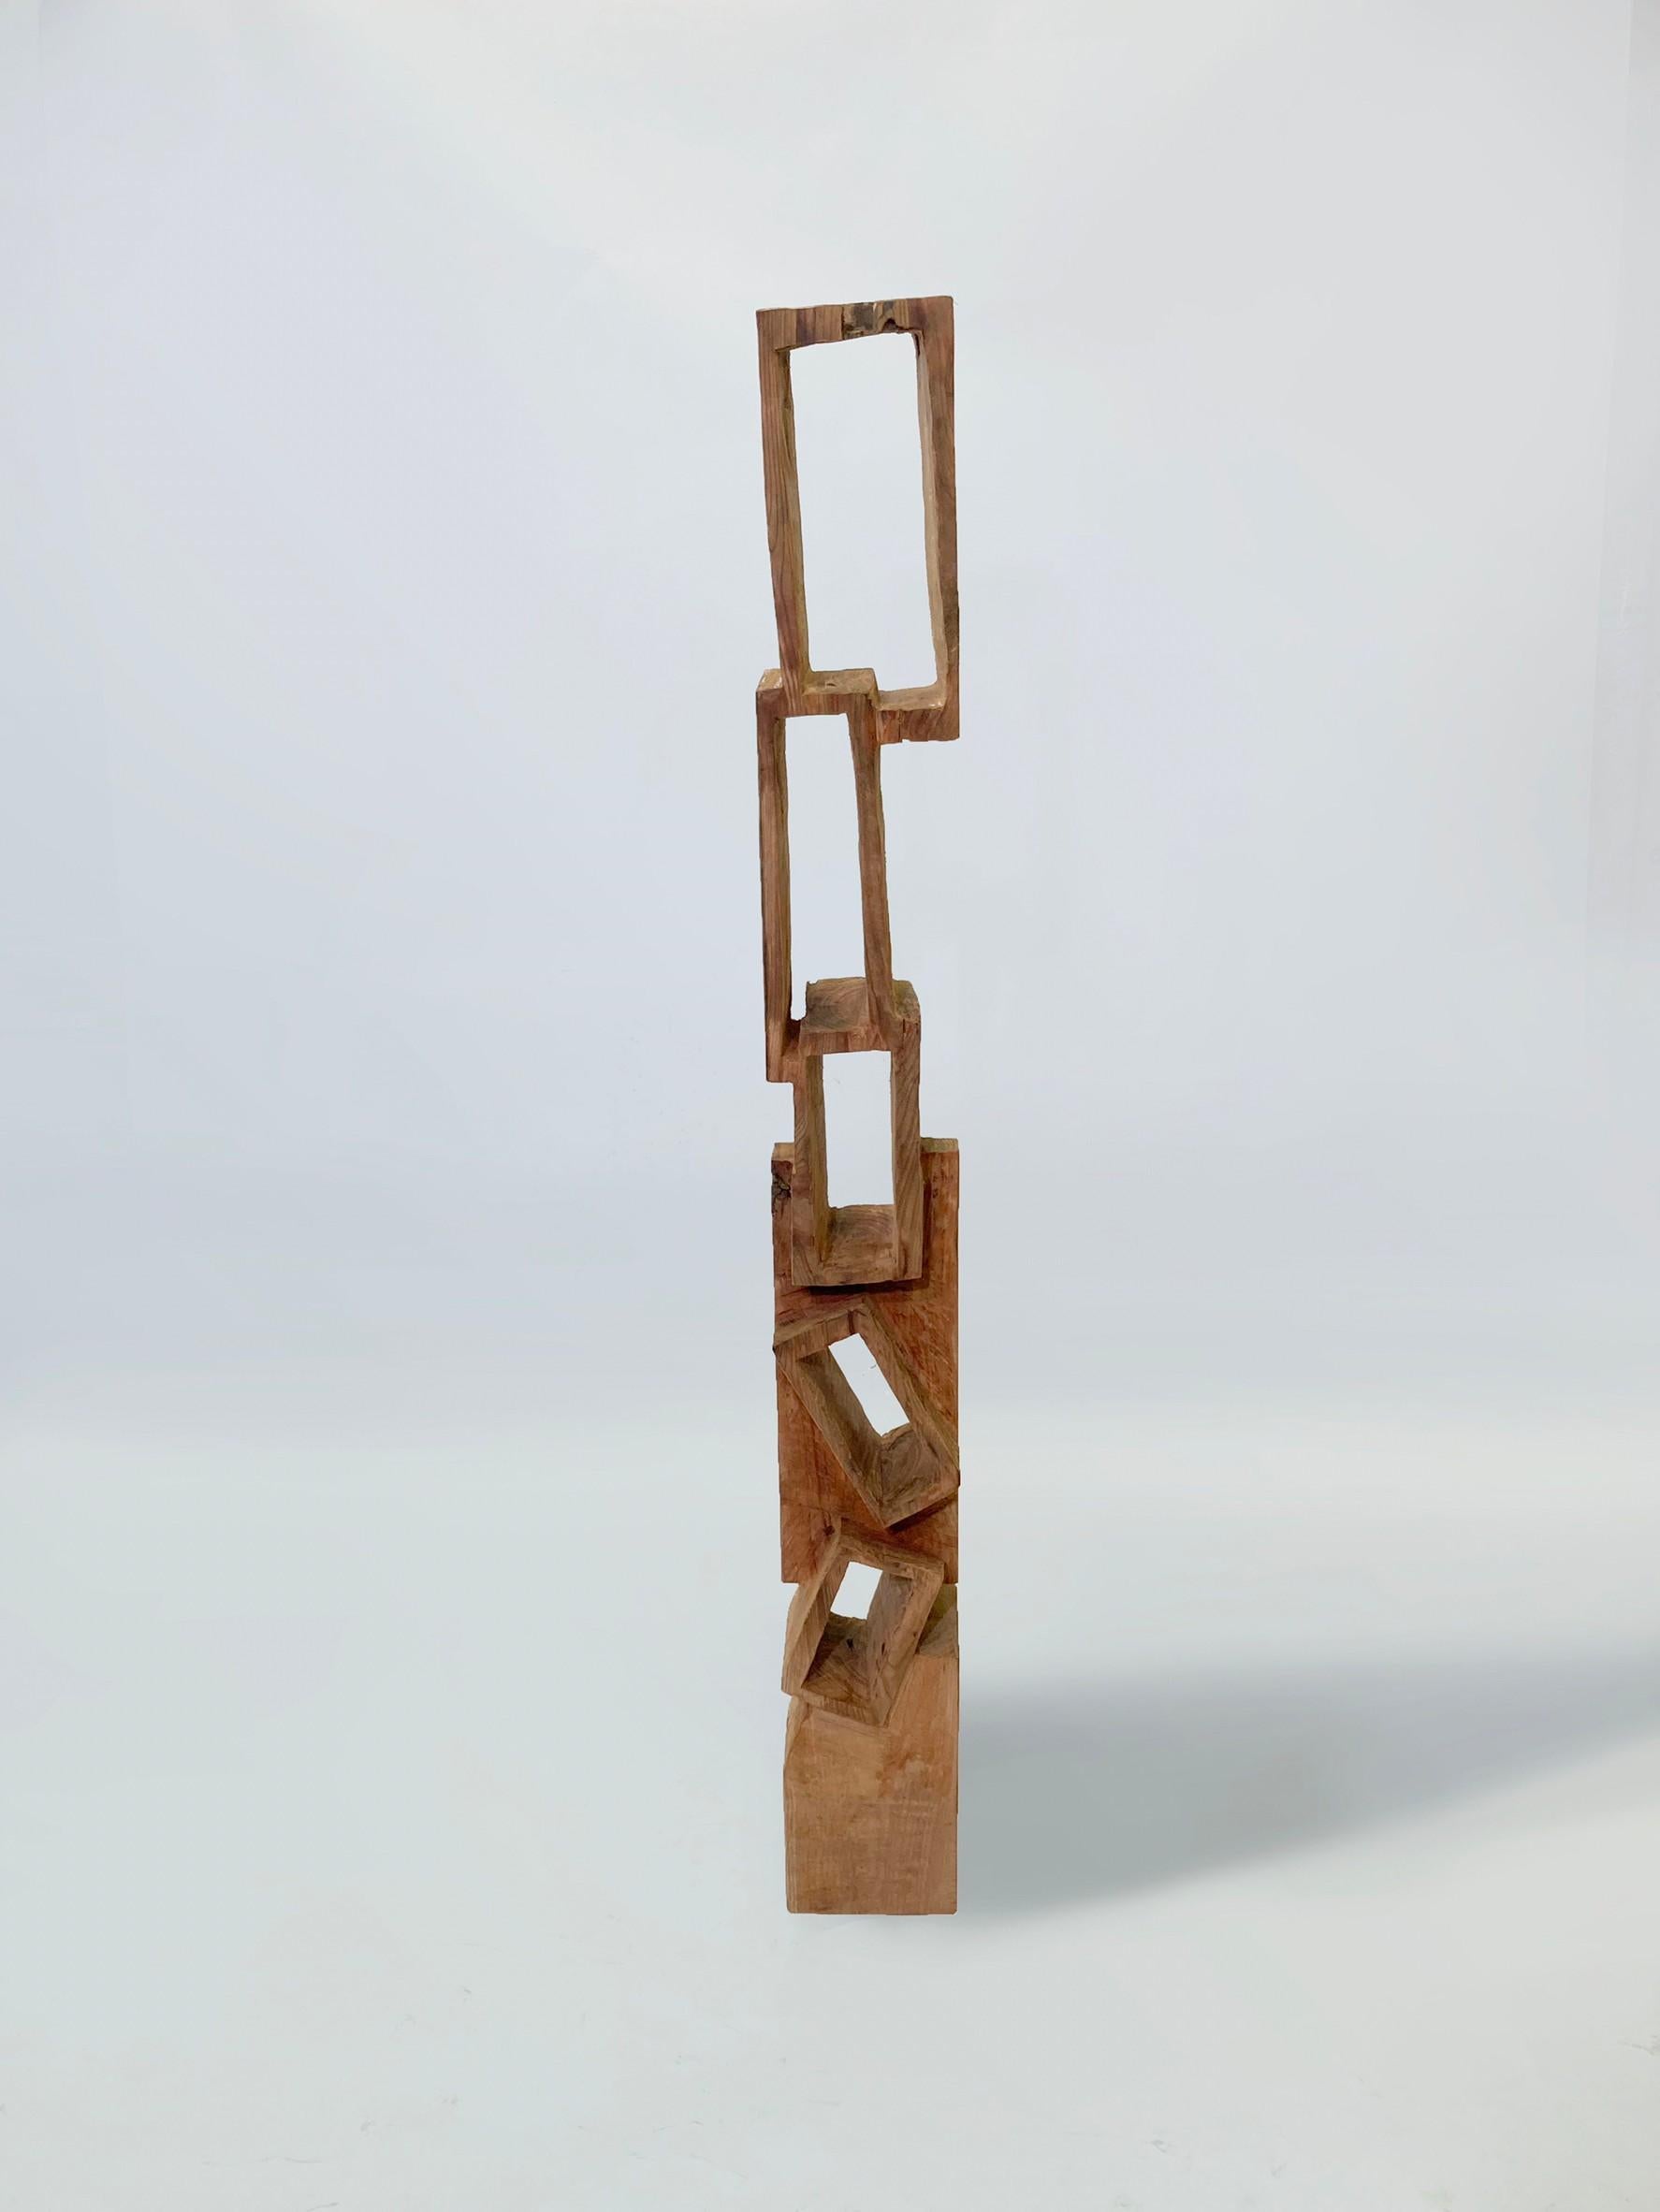 Masouleh Tower 02
Sculpture. Also it can be used as small bookcase. 

Material: Zelkova
This work is carved from log with some kinds of chainsaws.
Most of wood used for his works are unable to use anything, these woods are unsuitable material